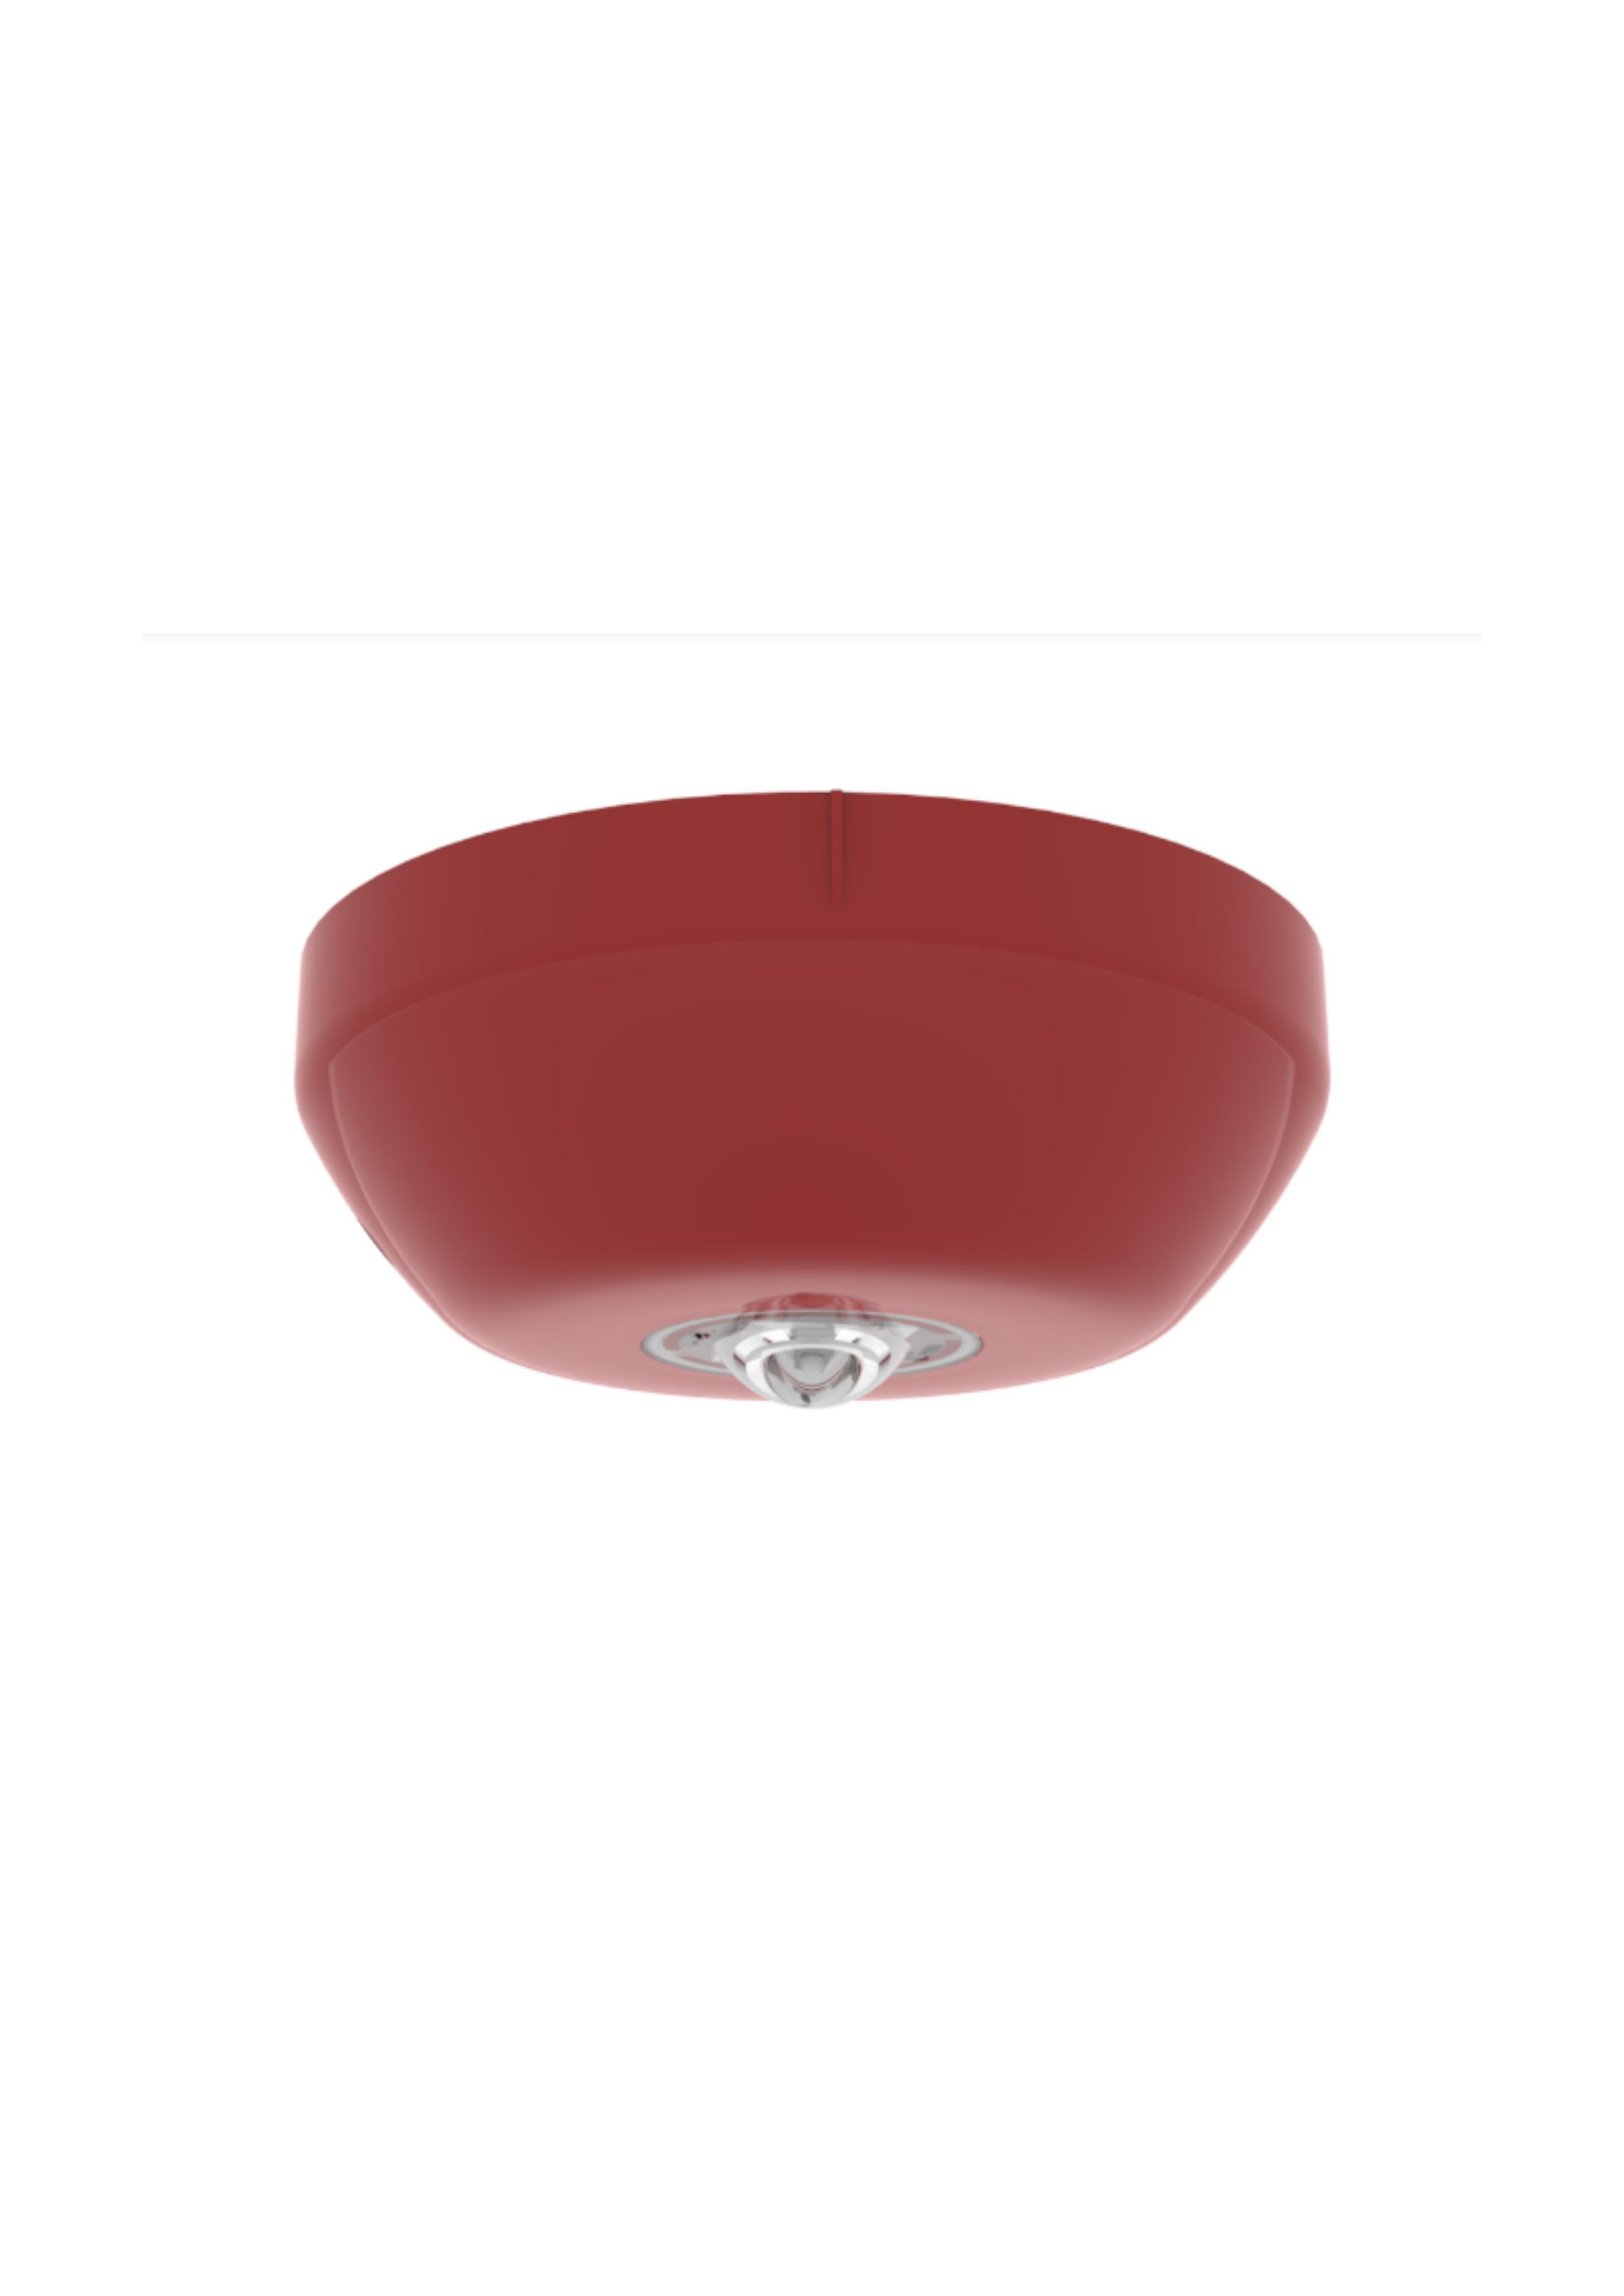 Ceiling Beacon - Red case, white LEDs (15m) 146022...